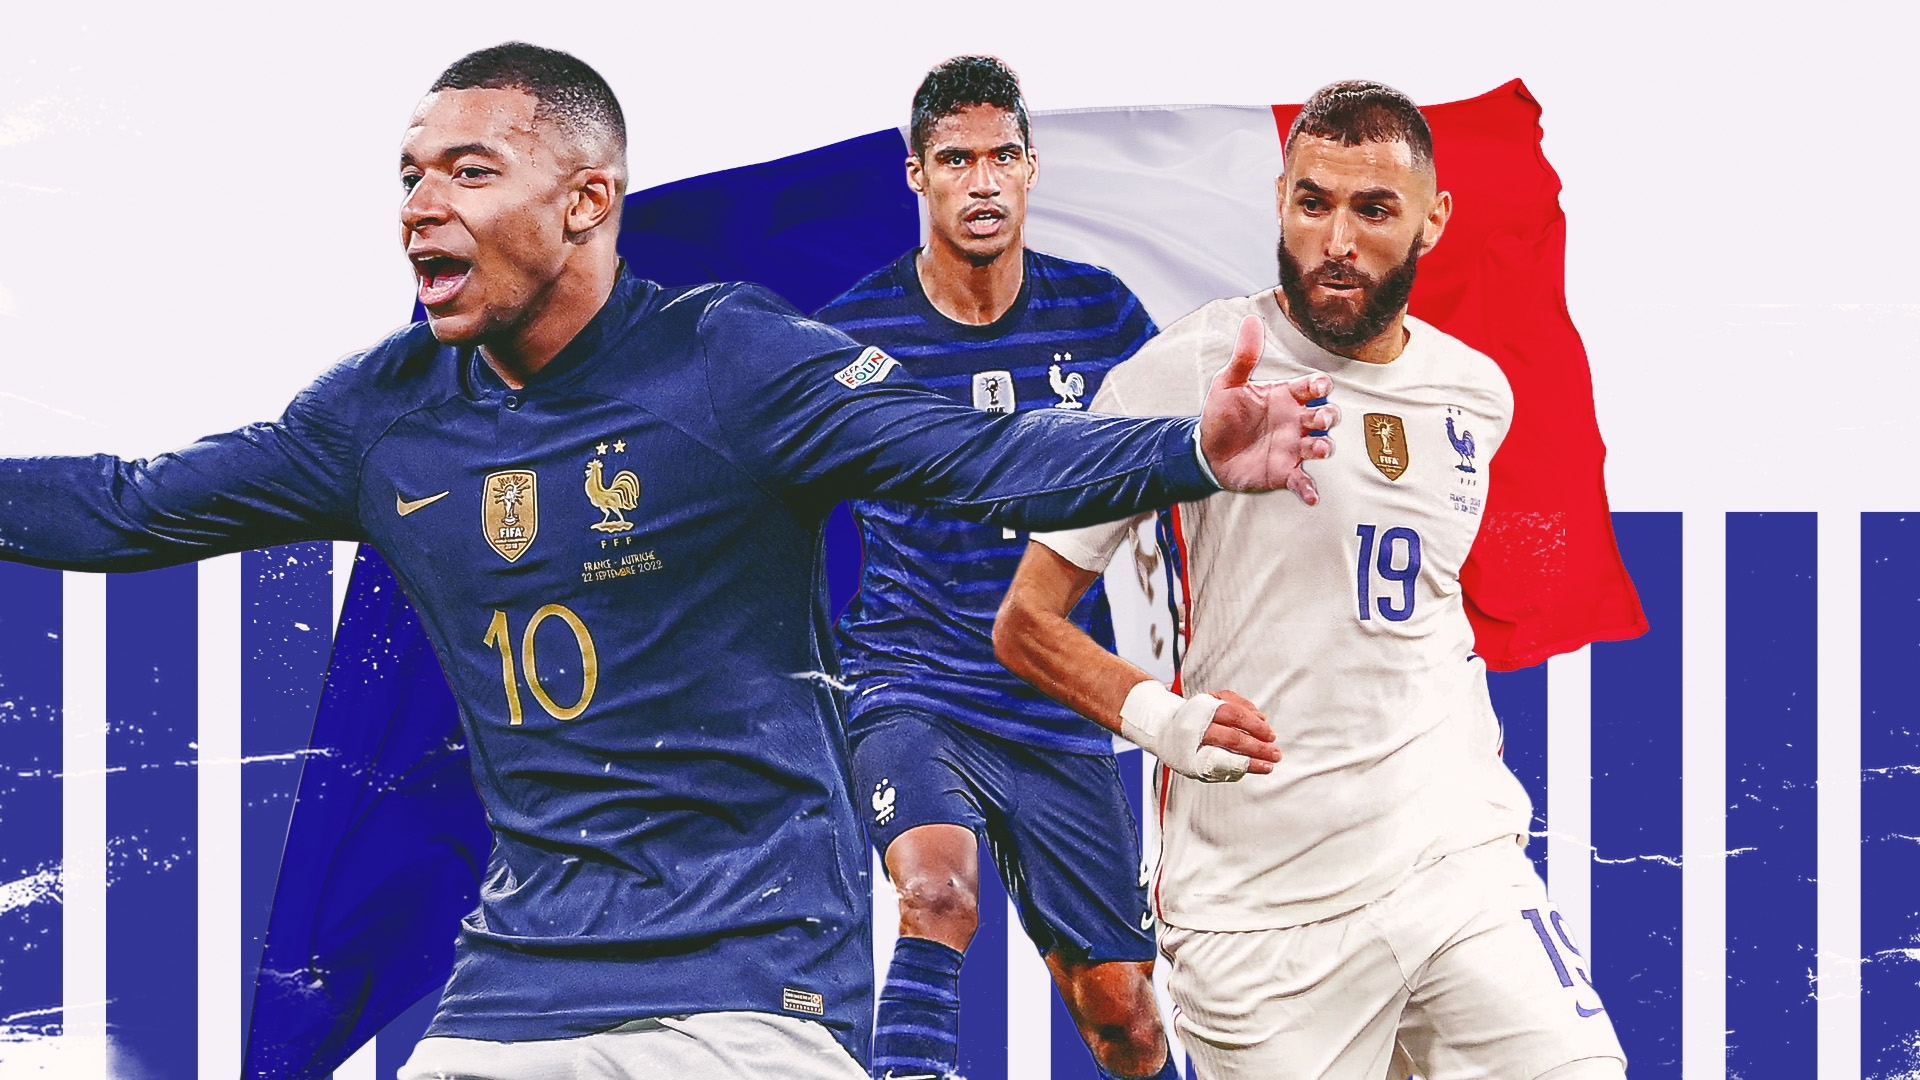 France World Cup 2022 squad: Who's in and who's out?